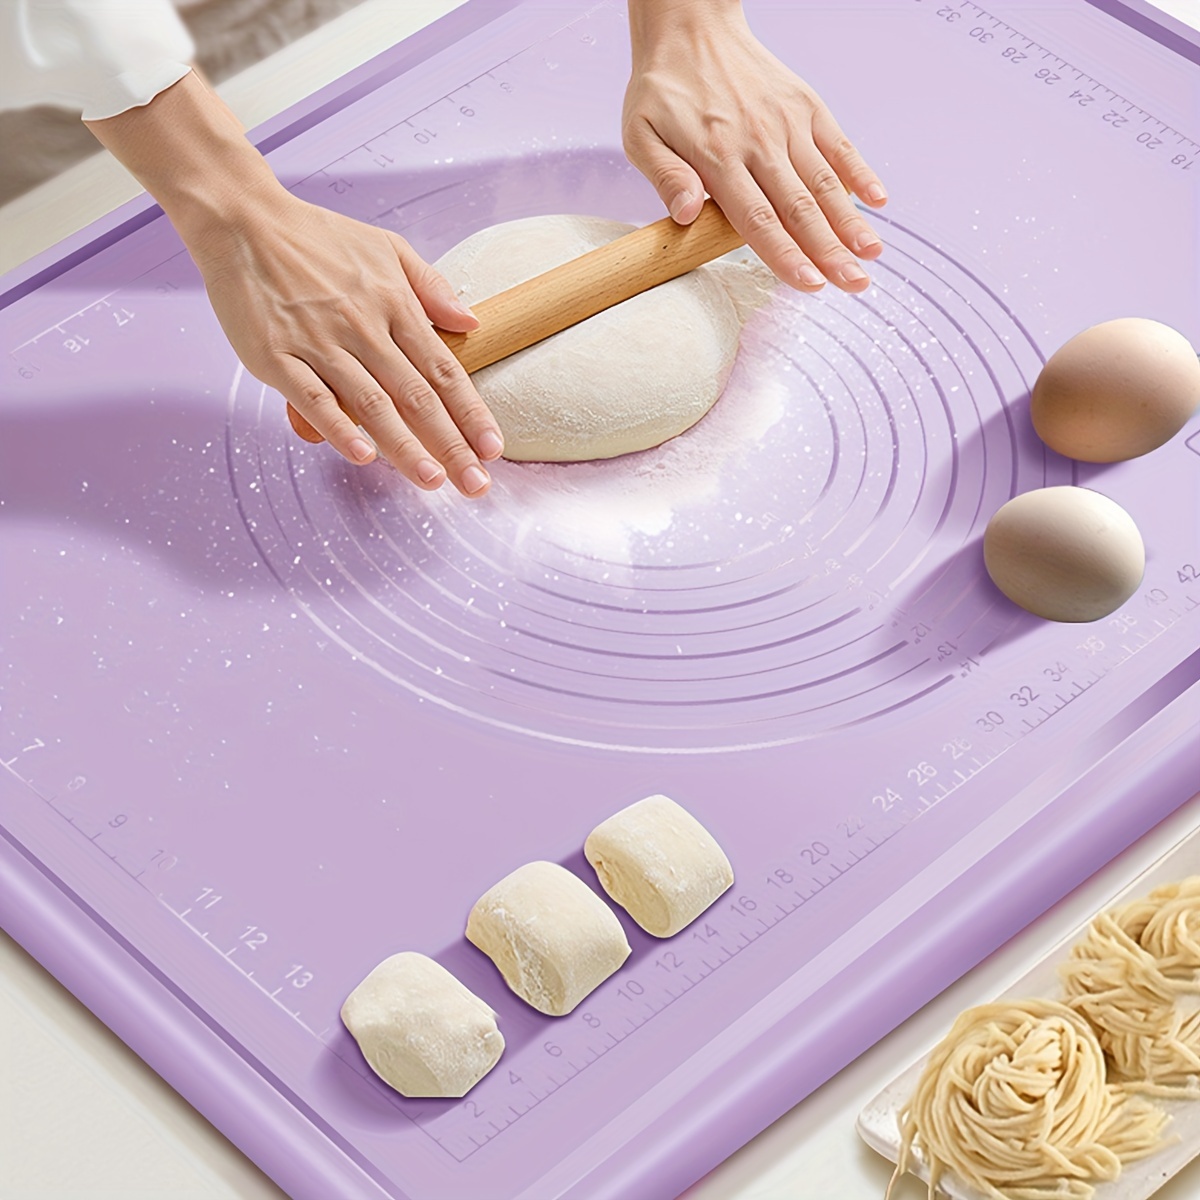 

Silicone Baking Mat: 60cm/23.6in X 80cm/31.4in, 750g, Food Grade, Non-stick, Durable, Perfect For Baking, Rolling Dough, And More Kitchen Tasks